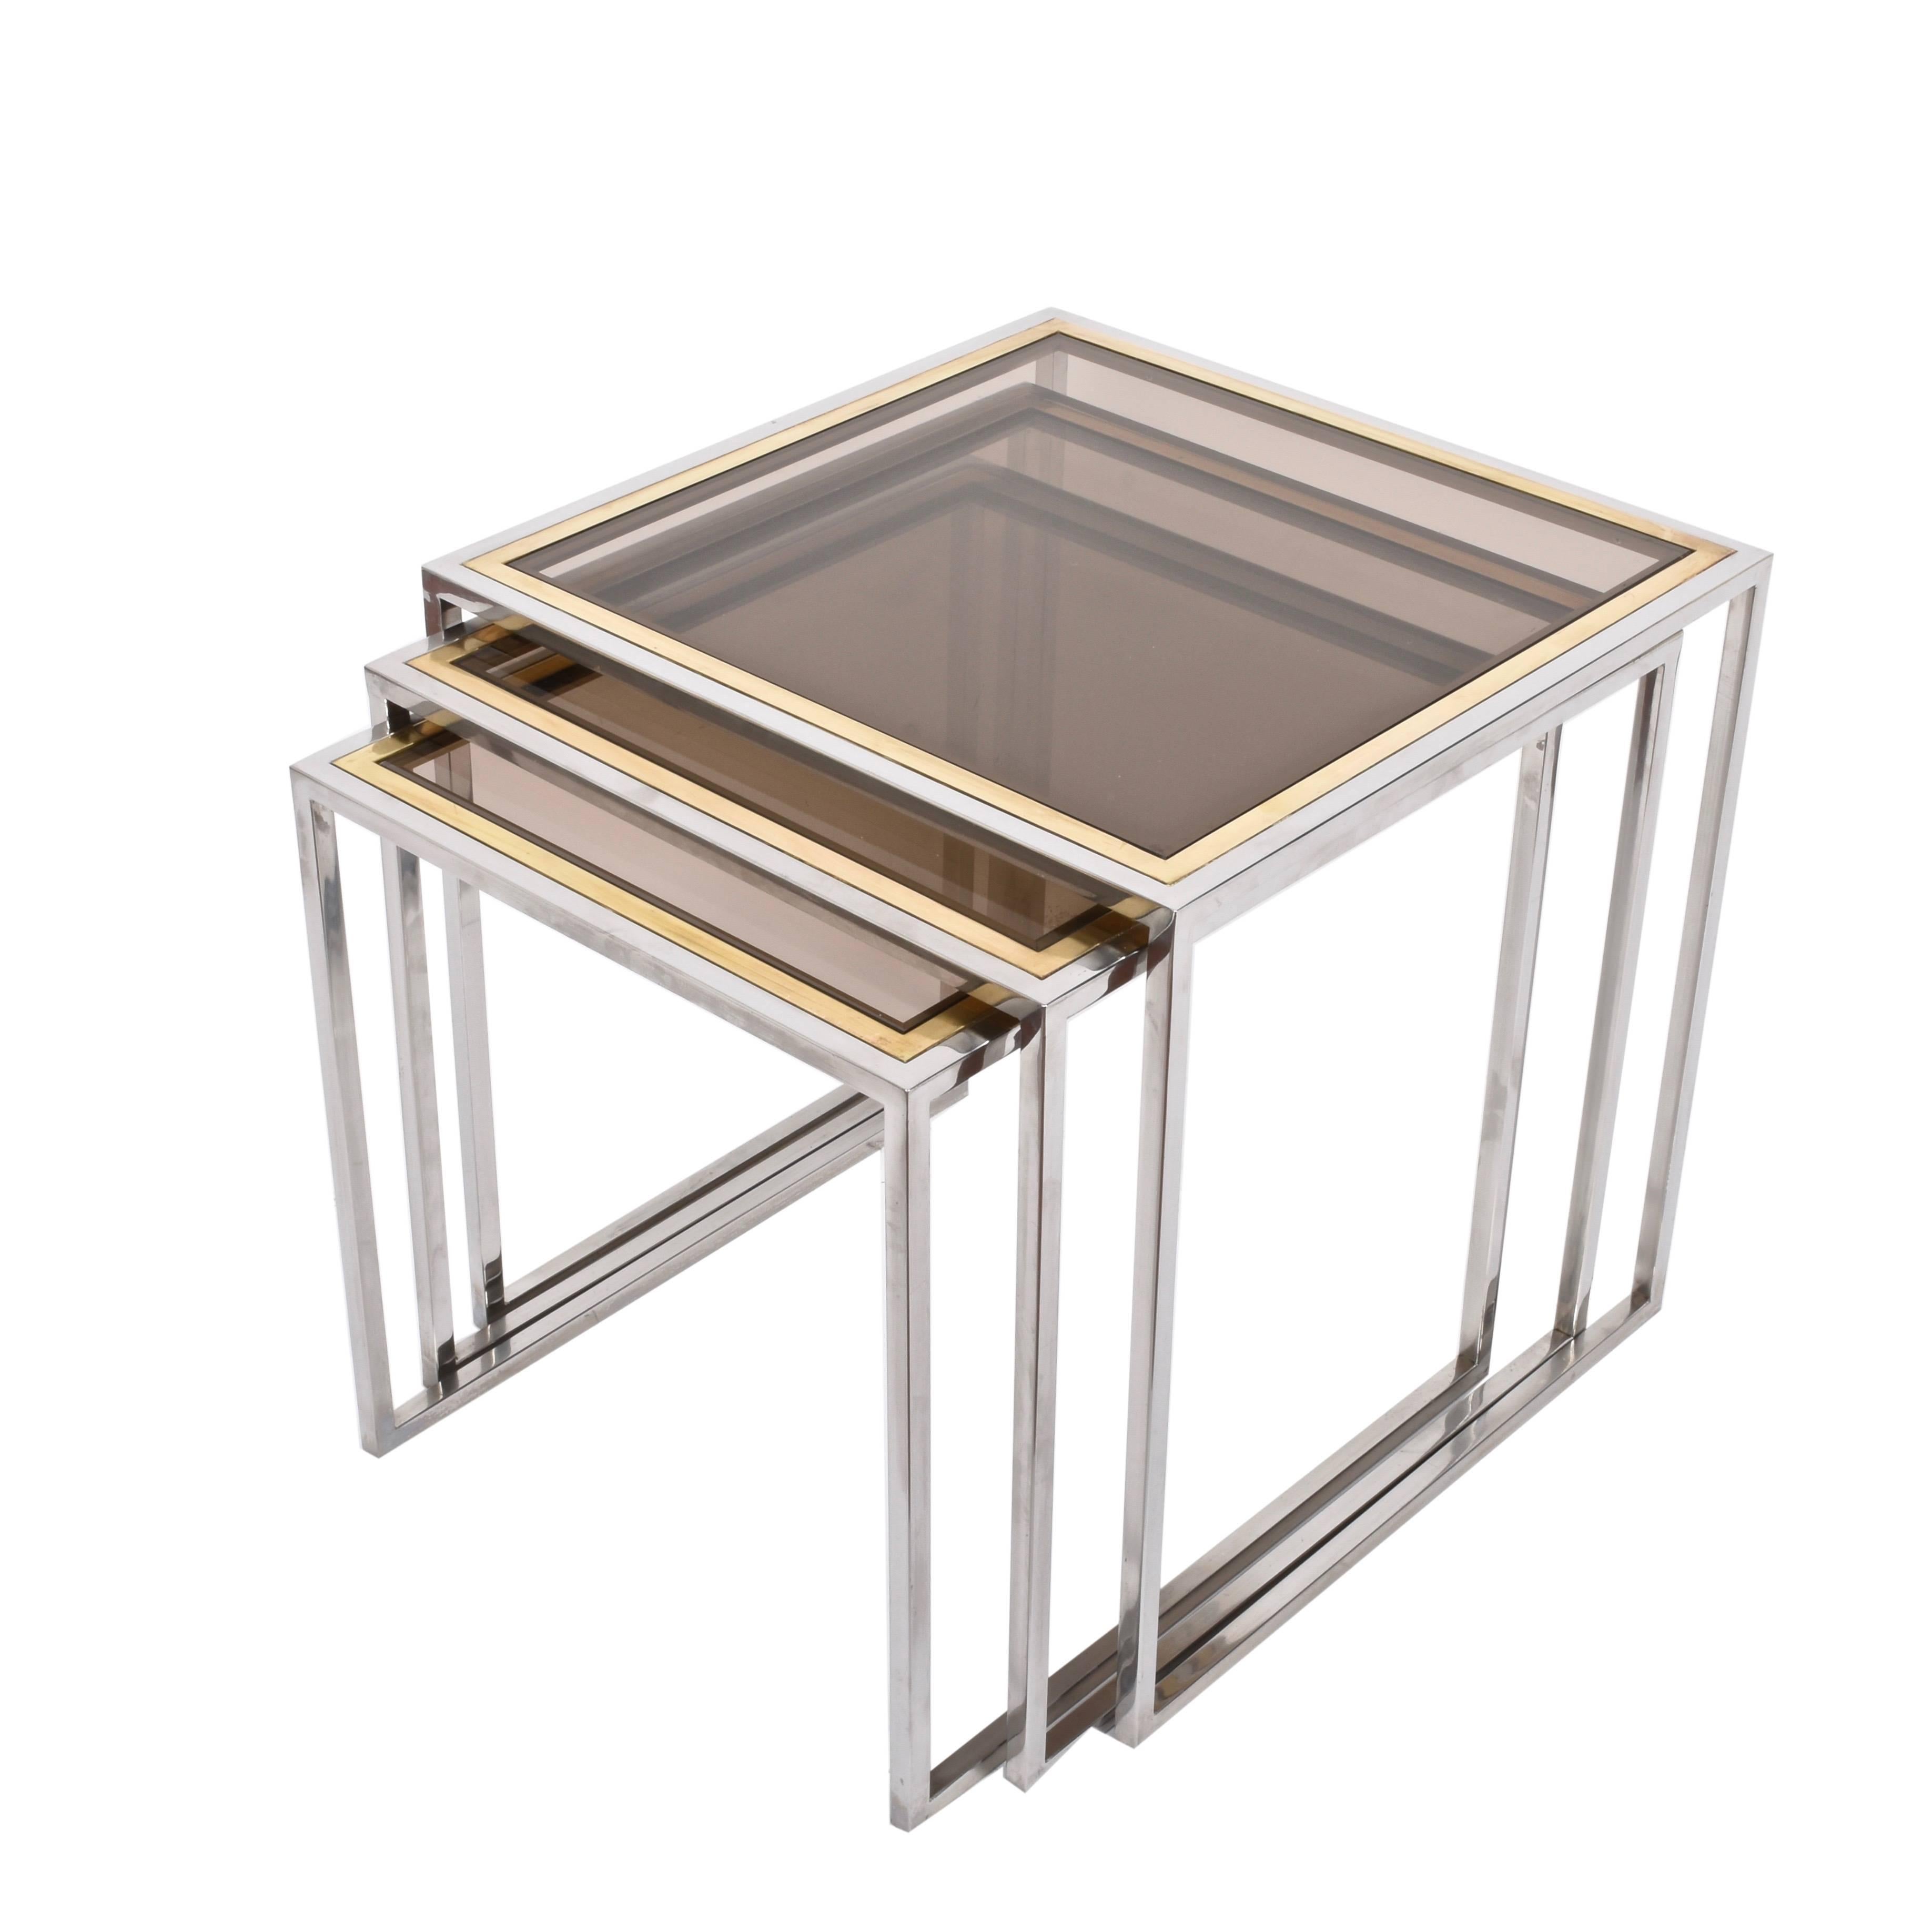 Chrome and Brass Nesting Italian Coffee Tables with Smoked Glass Top, 1970s For Sale 3